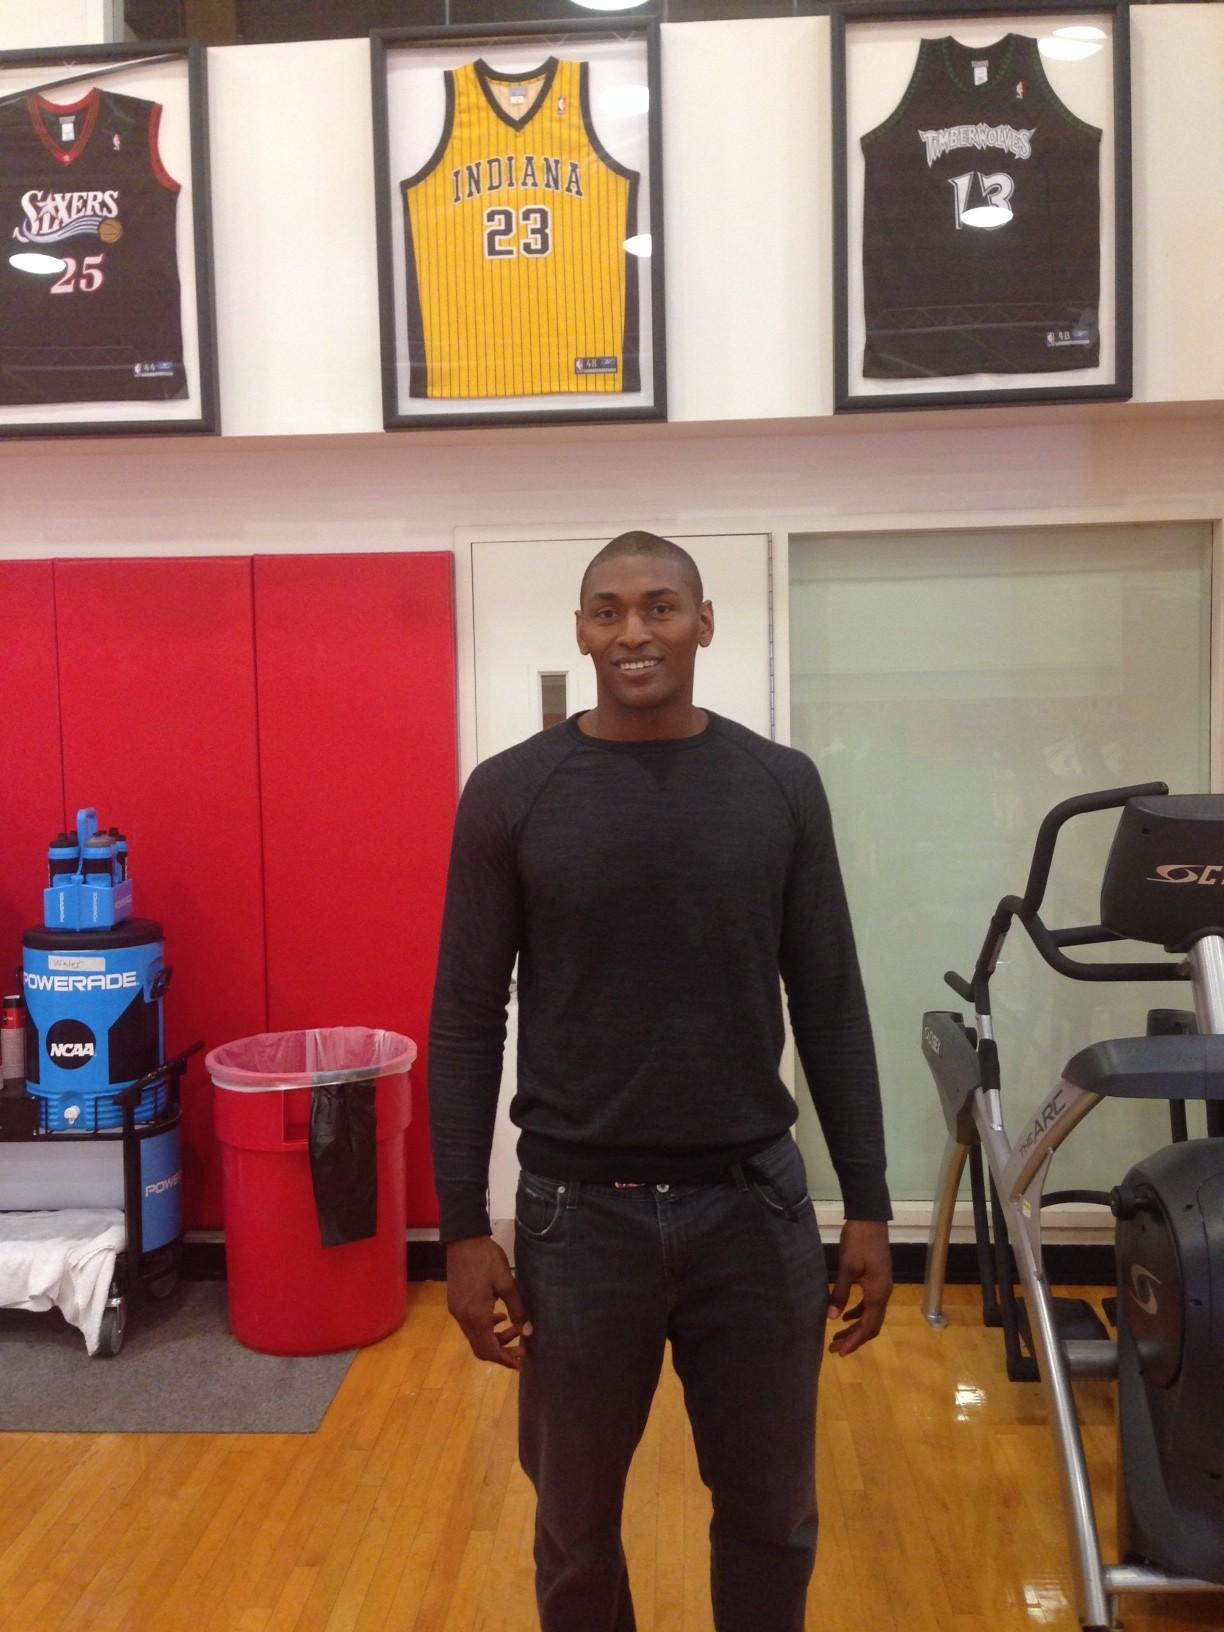 St. John's basketball: Formerly known Ron Artest changes name again